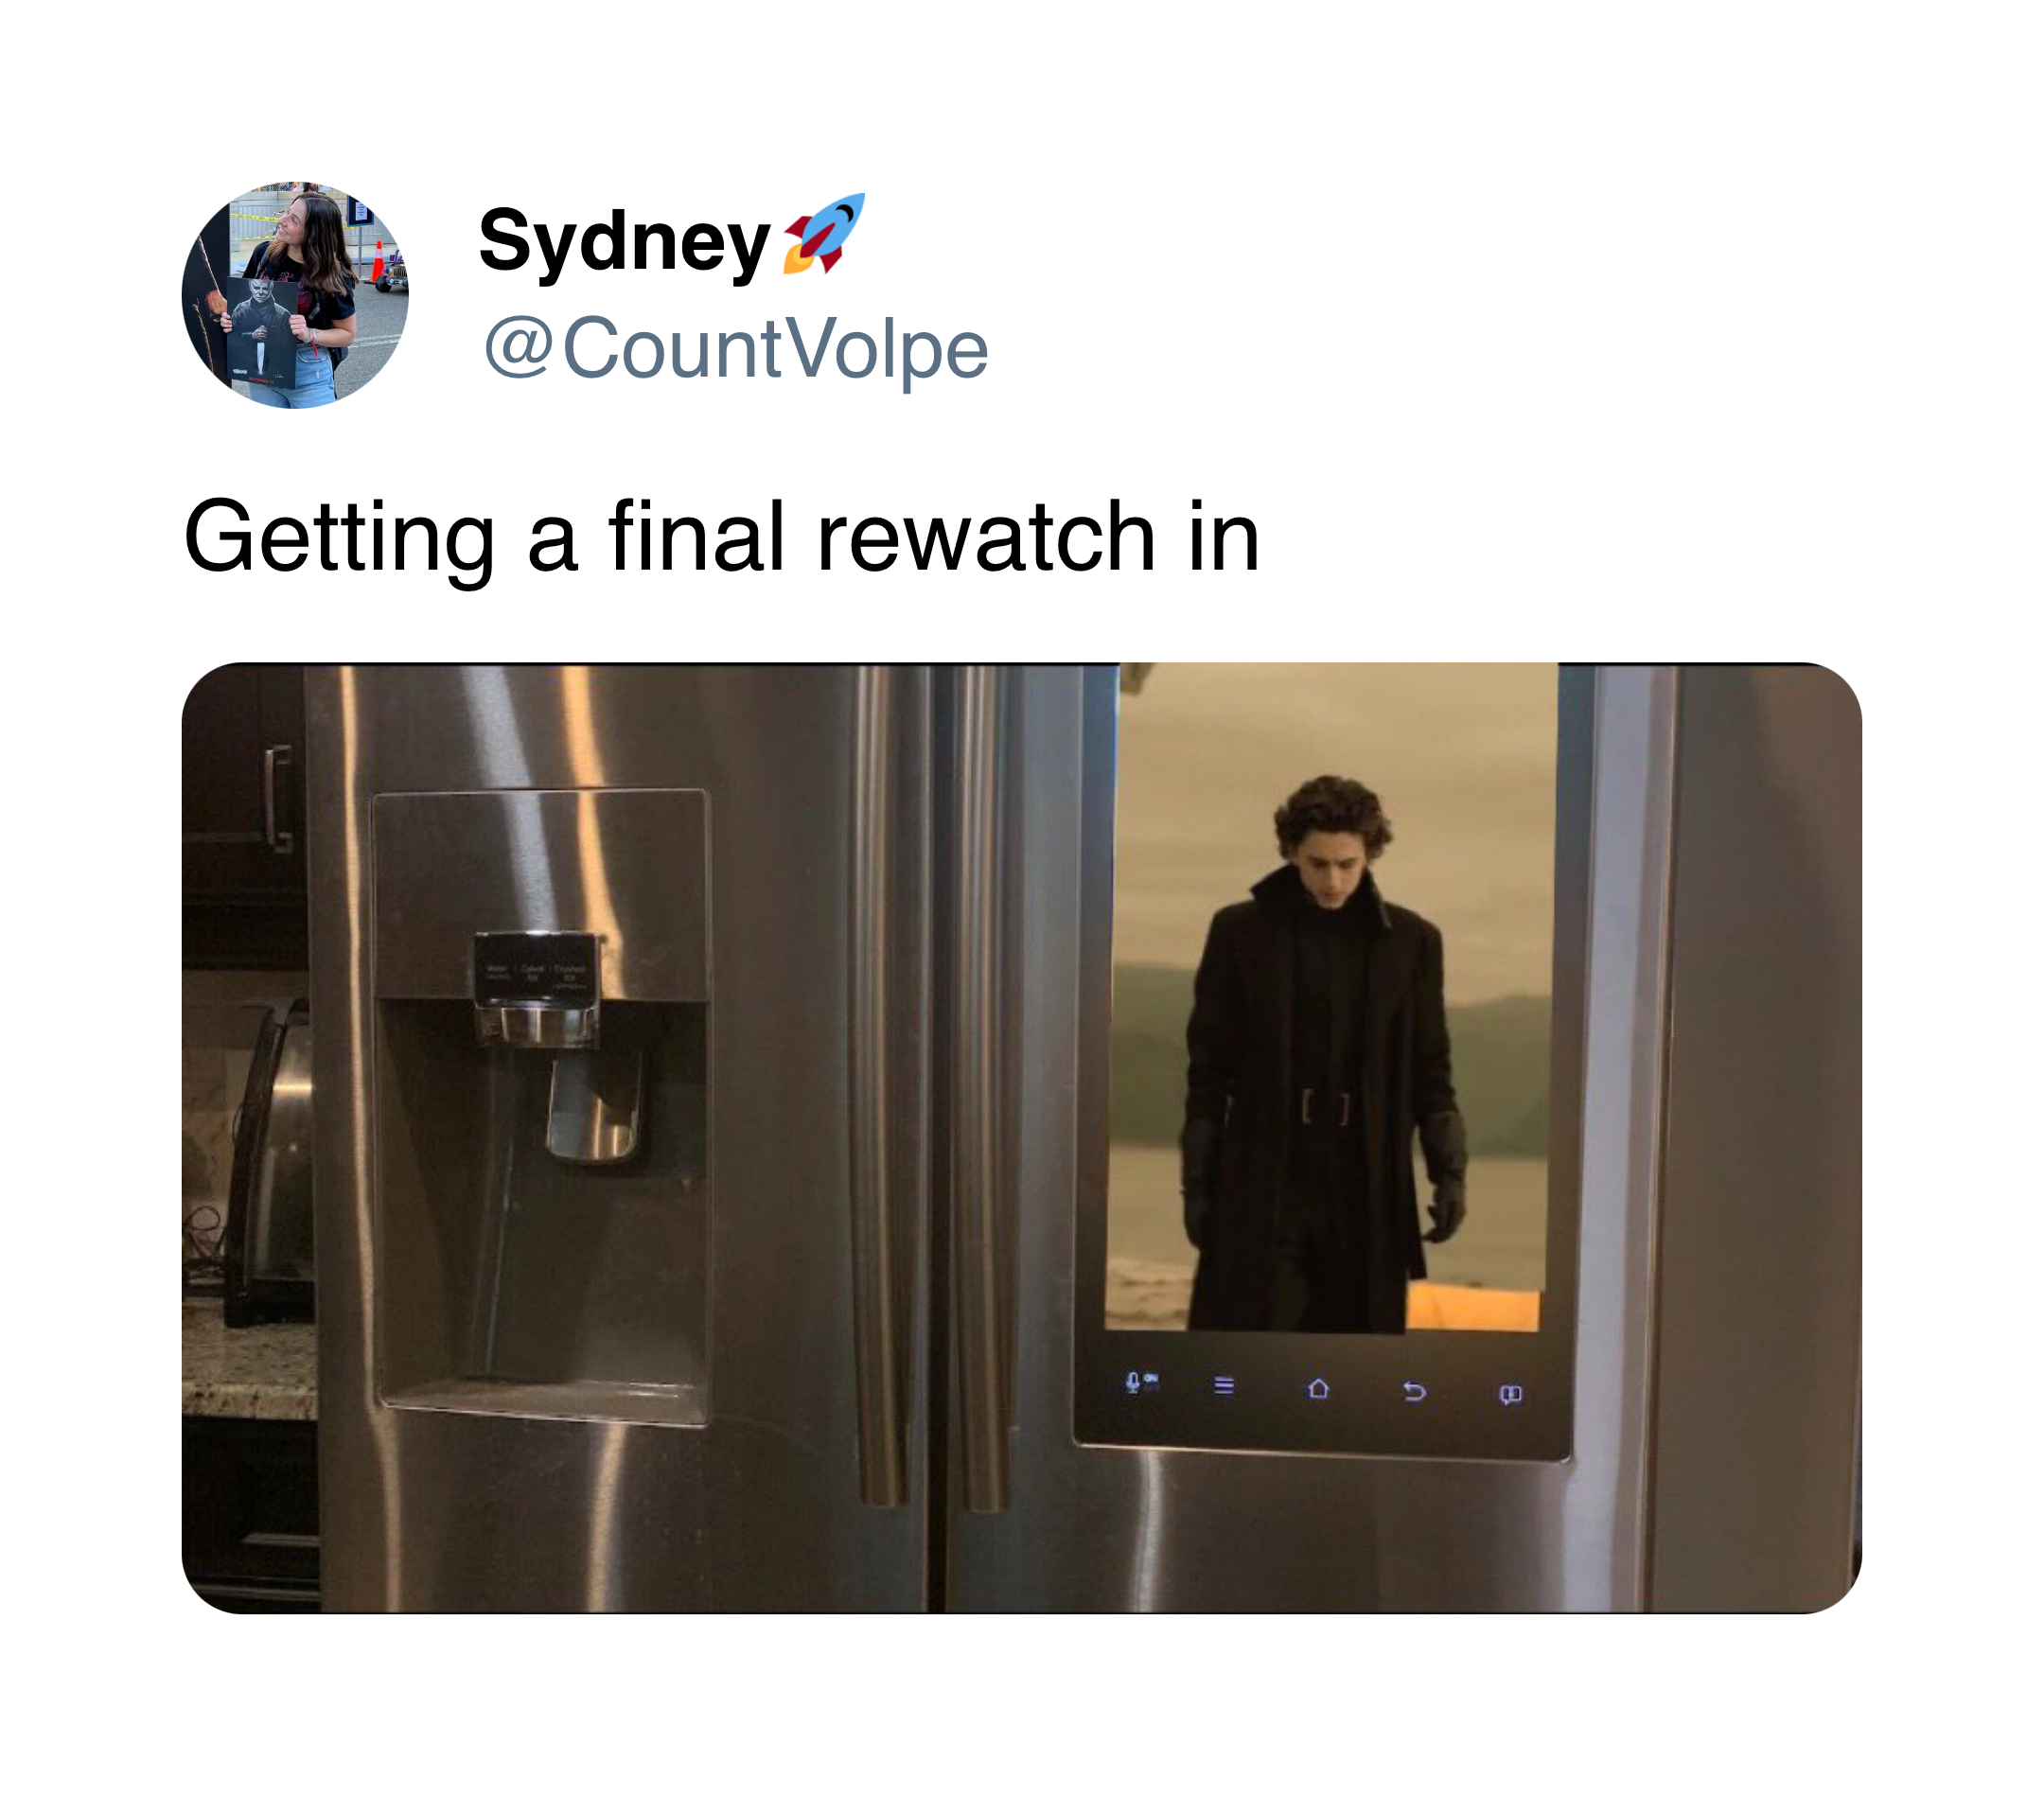 @CountVolpe on Twitter: A photoshop of Dune: Part One playing on a smart refrigerator screen. "Getting a final rewatch in"